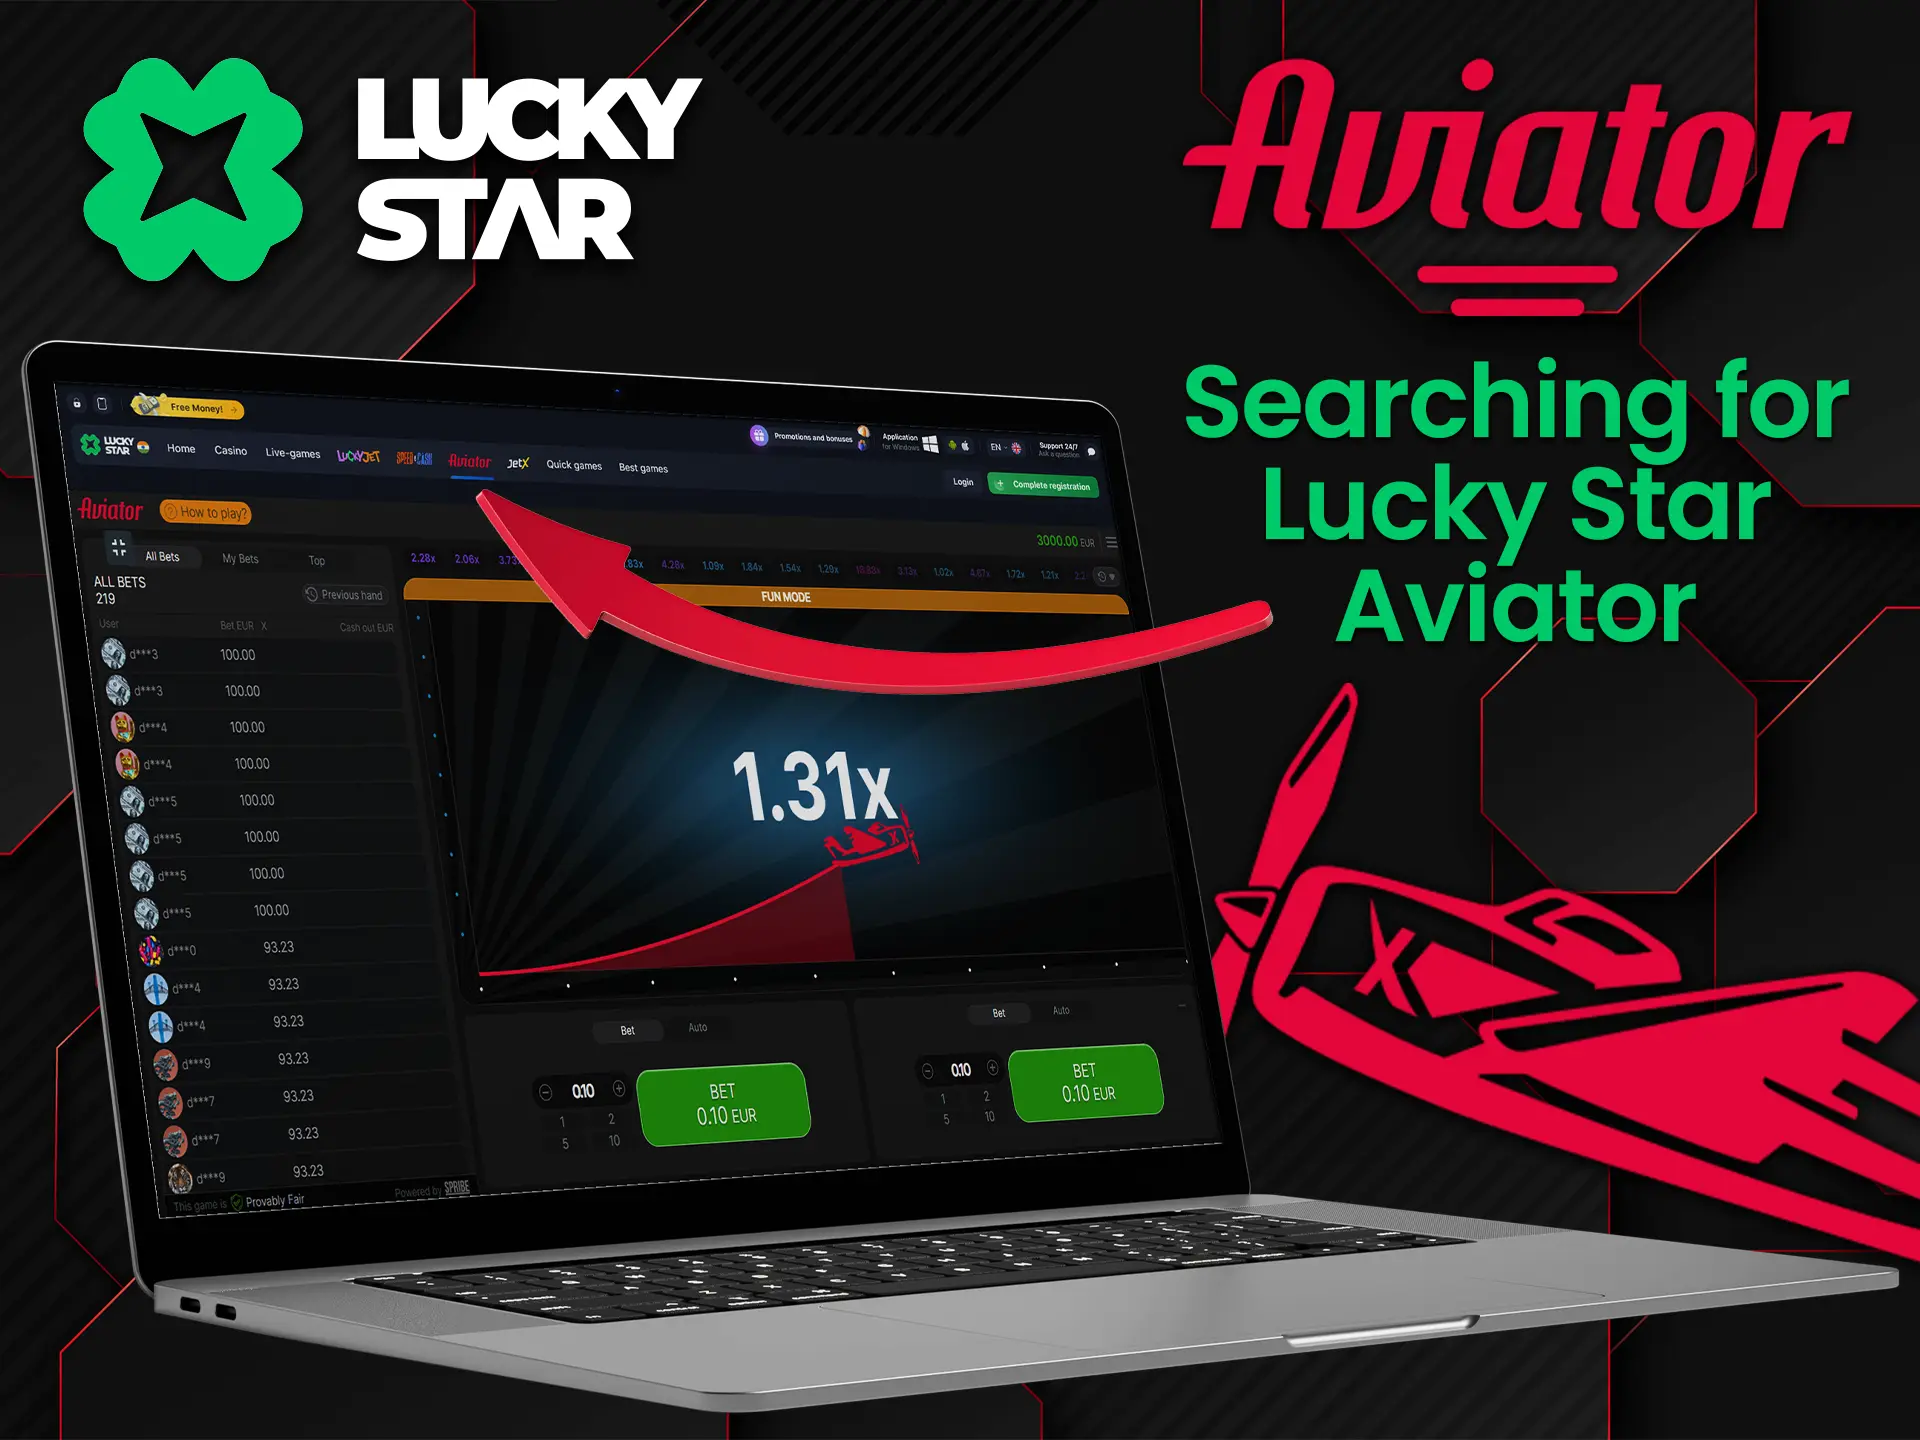 Use the fast way to find the Lucky Star Aviator game.